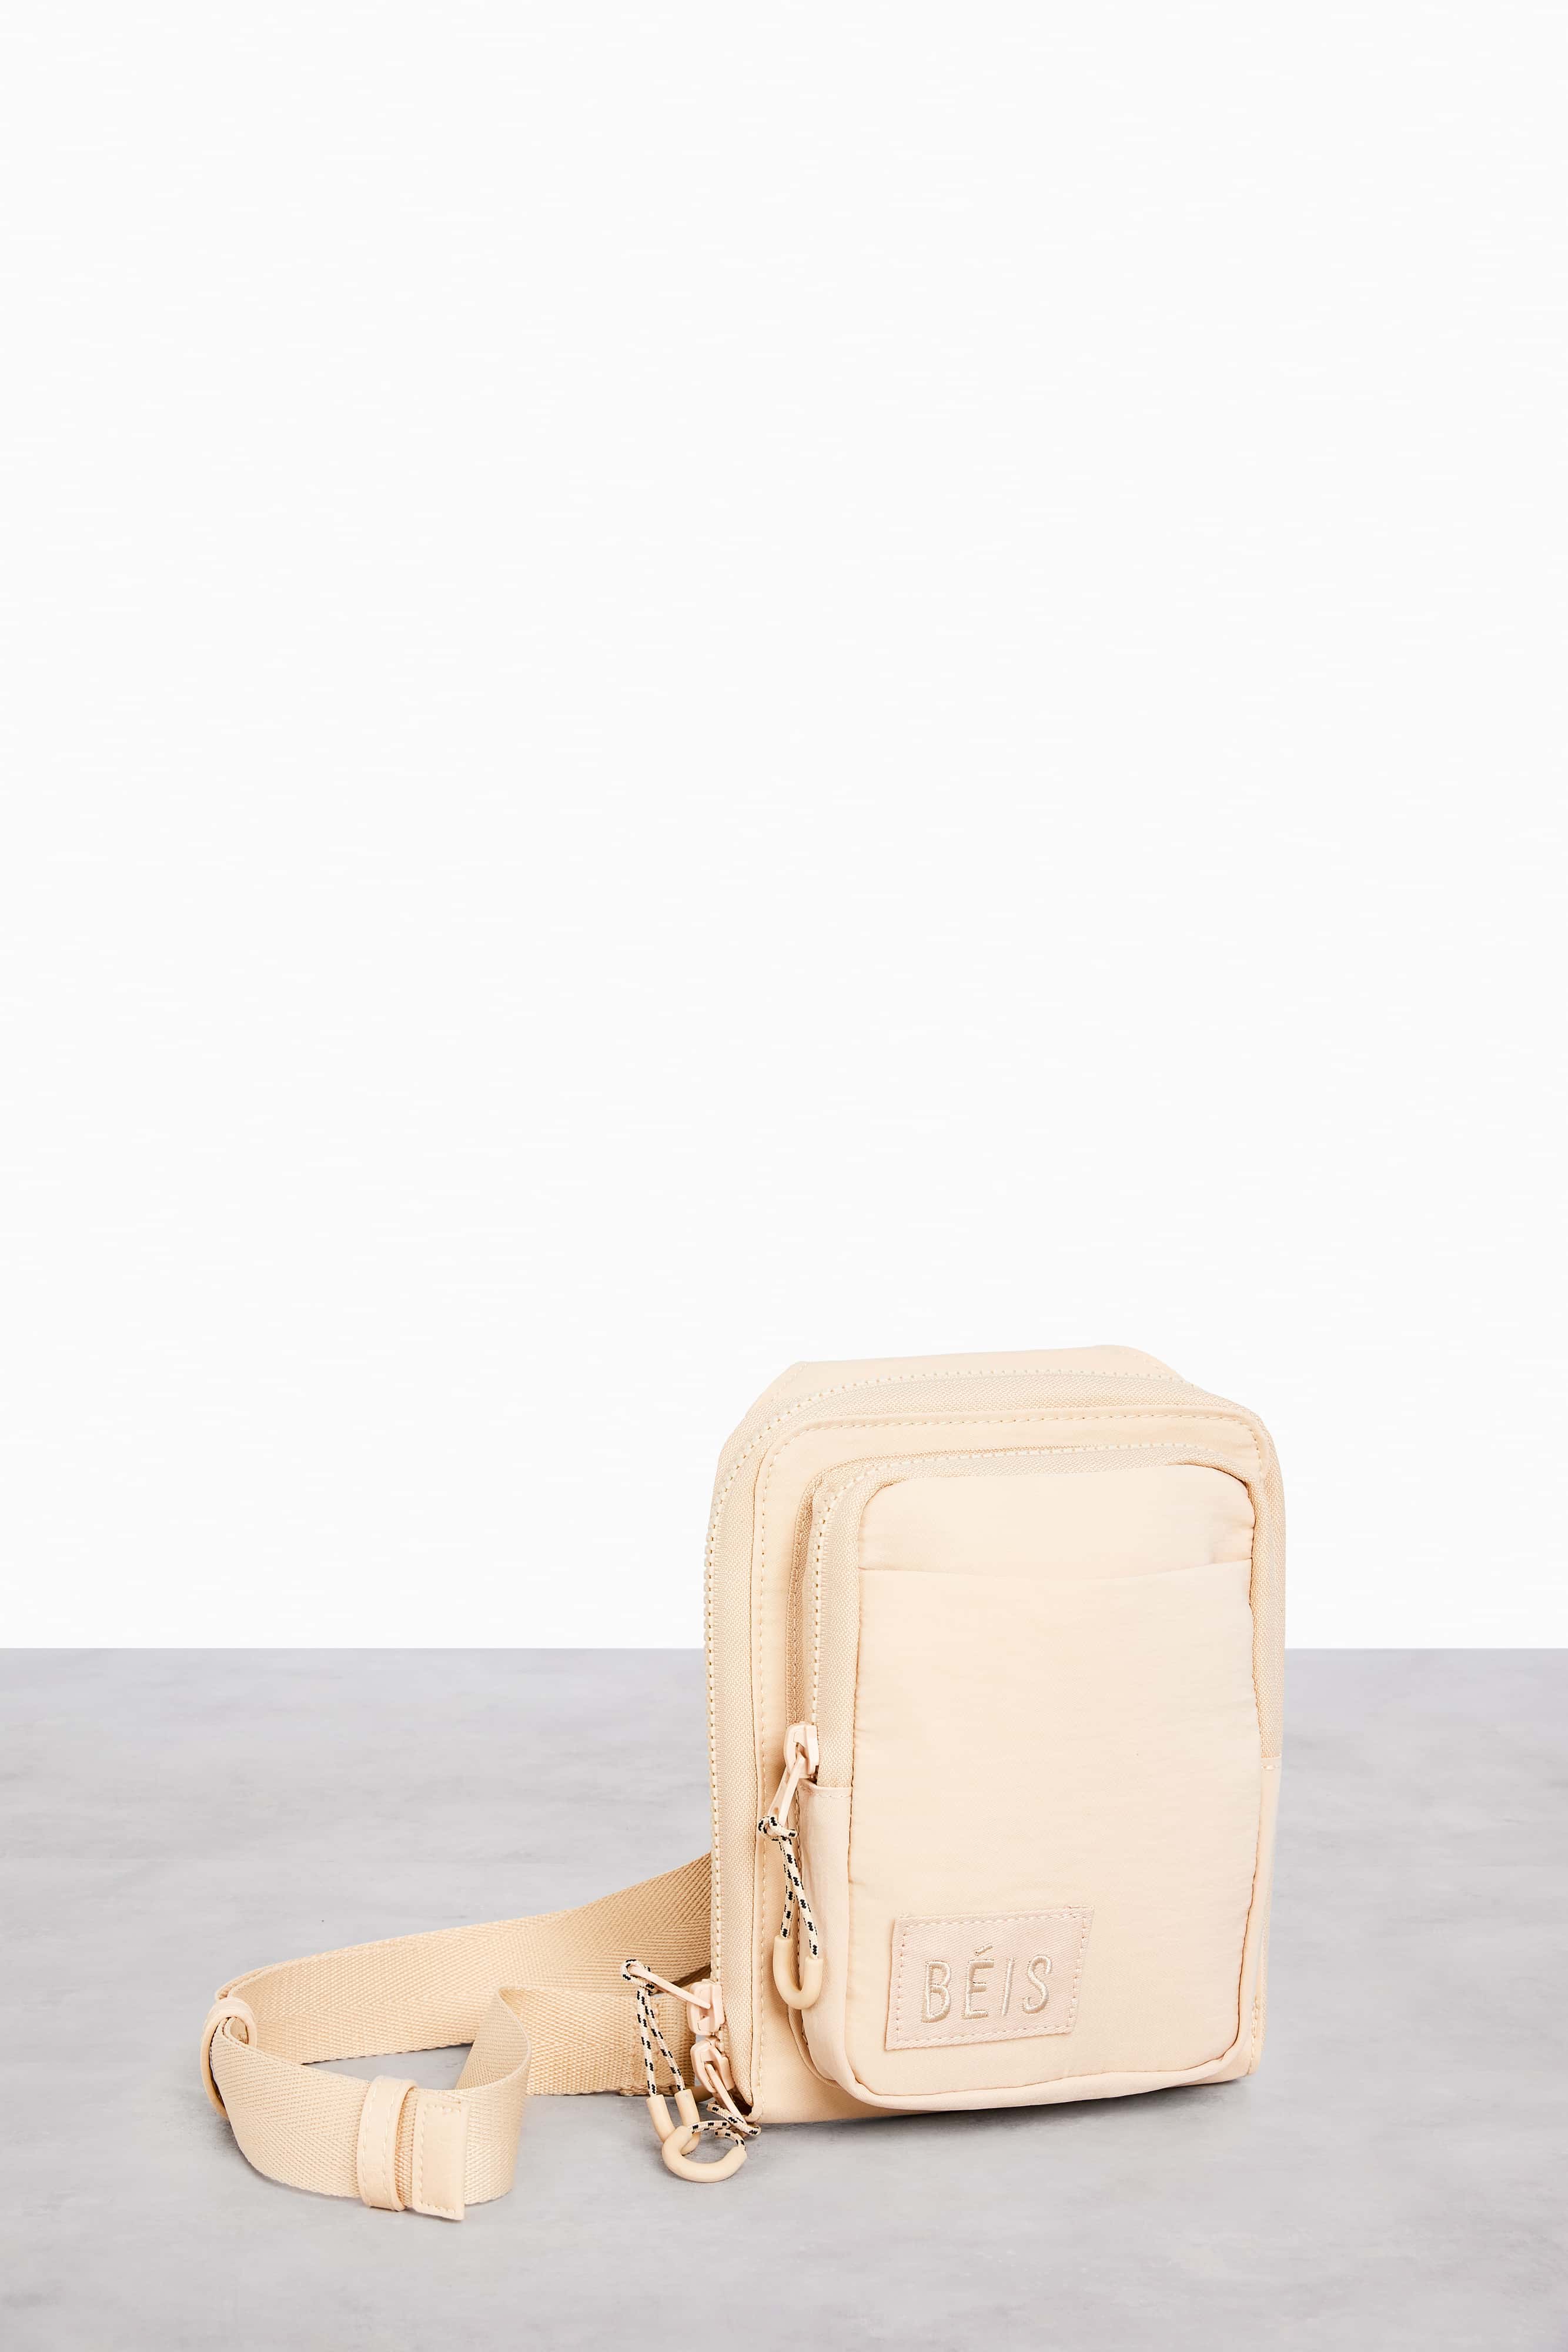 The Sport Pack in Beige